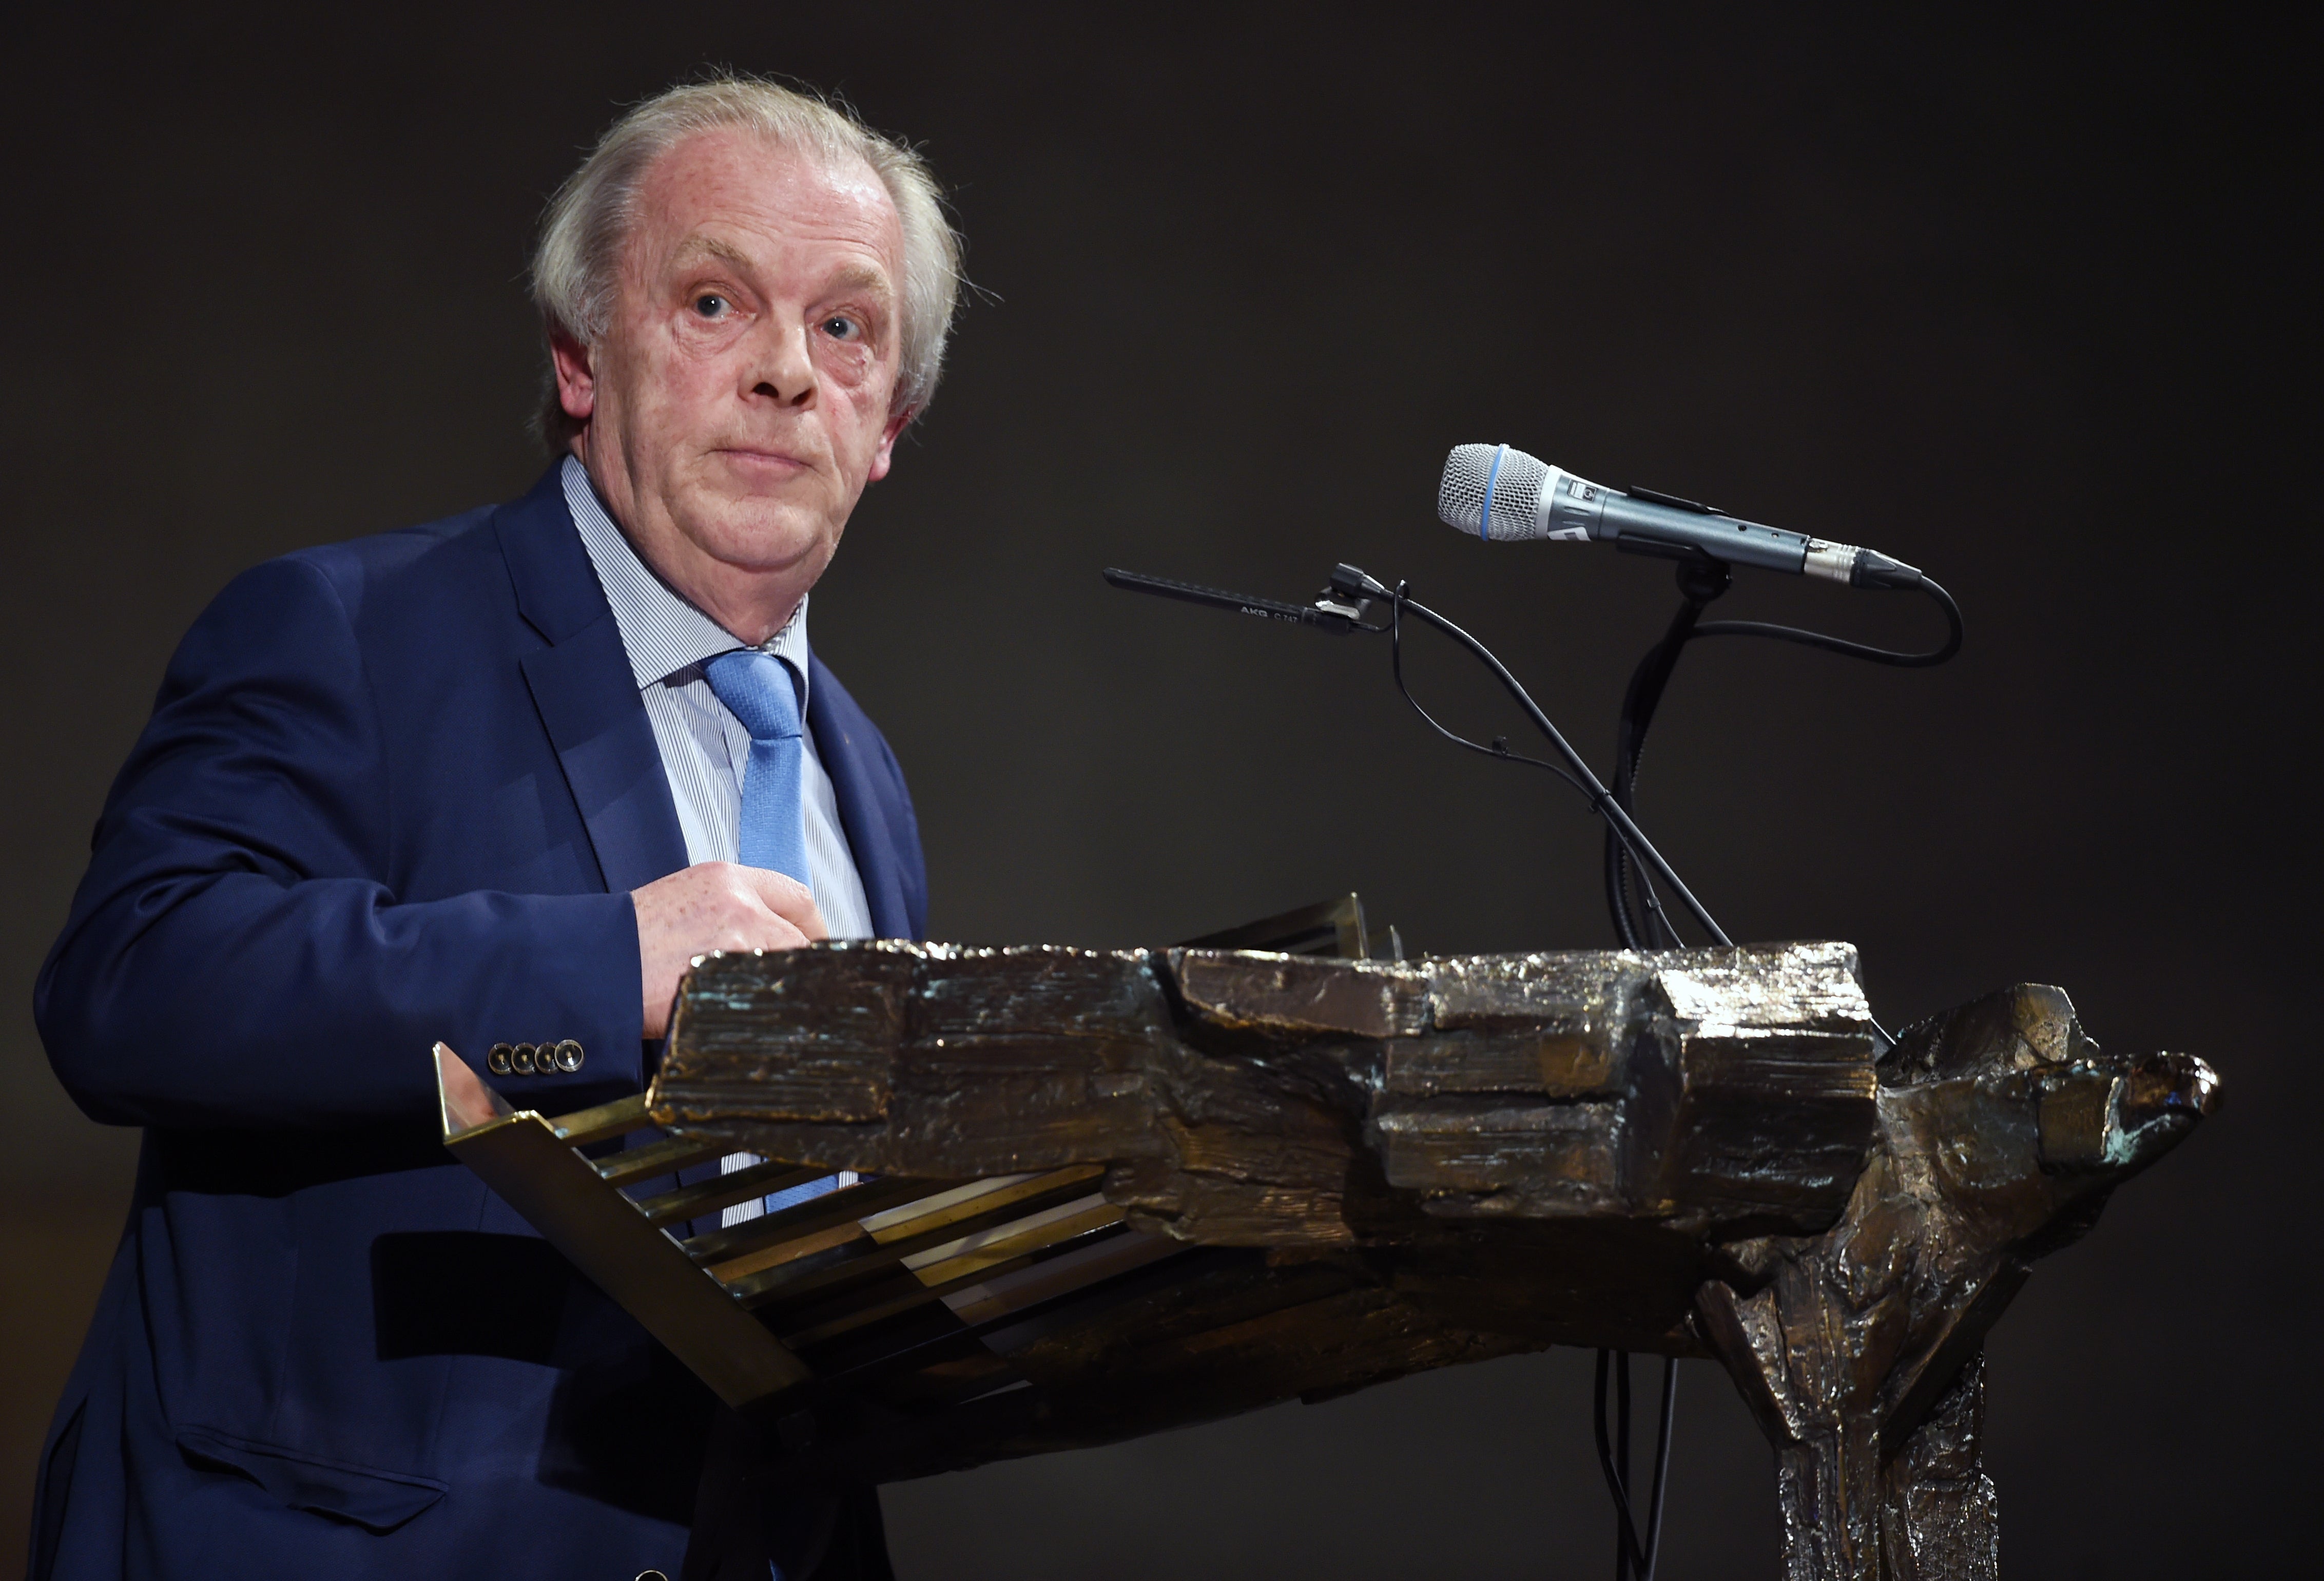 Gordon Taylor has received the Professional Footballers' Association's merit award for his services to football